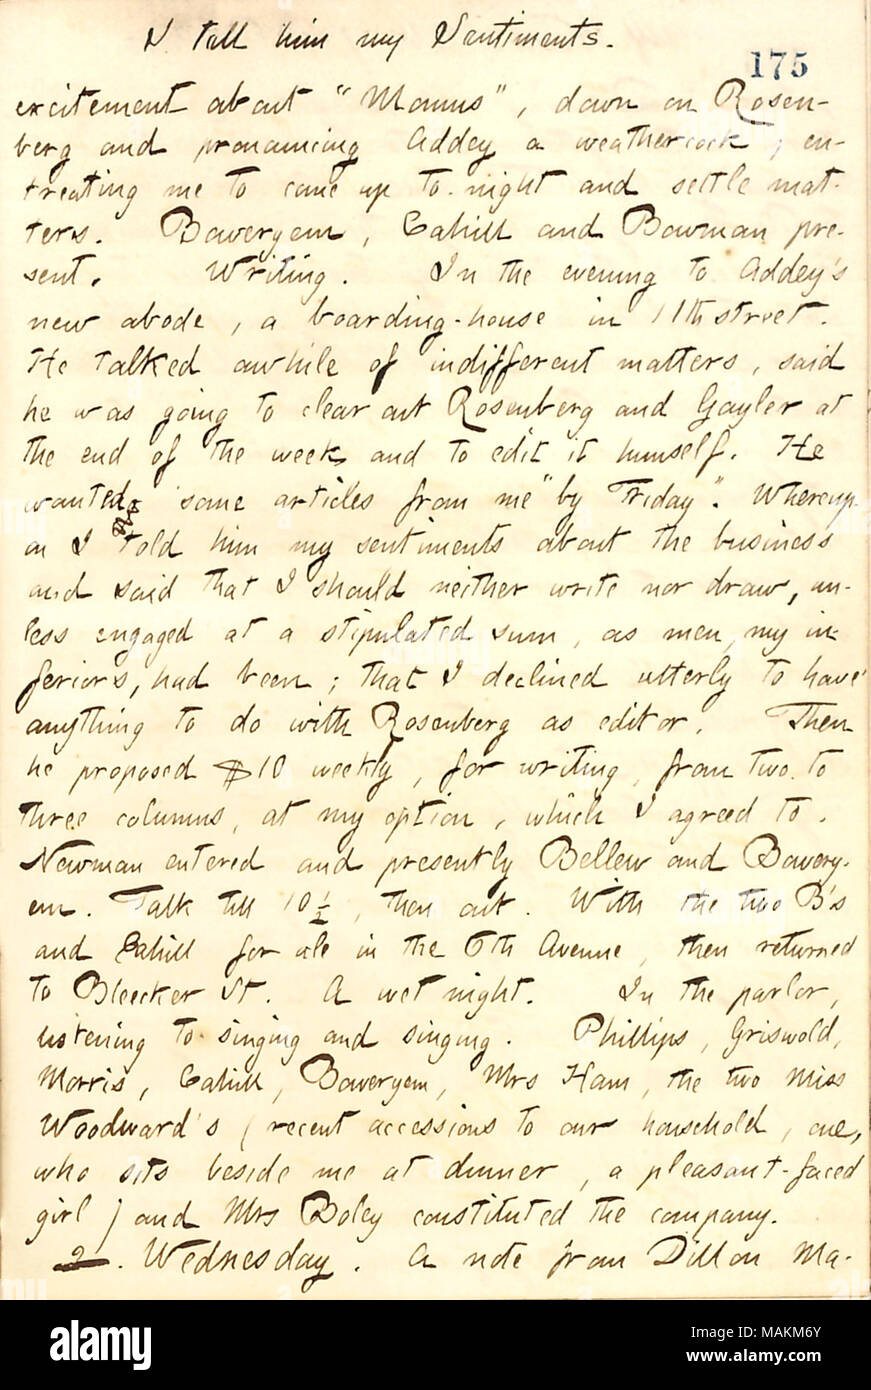 Regarding Gunn's discussion with Henry Addey about writing for Momus.  Transcription: I tell him [William Newman] my Sentiments. excitement about 'Momus,' down on Rosenberg and pronouncing [Henry] Addey a weathercock; entreating me to come up to-night and settle matters. [George] Boweryem, [Frank] Cahill and [Amos] Bowman present. Writing. In the evening to Addey's new abode, a boarding-house in 11th street. He talked awhile of indifferent matters, said he was going to clear out Rosenberg and [Charles] Gayler at the end of the week and to edit it himself. He wanted some articles from me 'by Fr Stock Photo